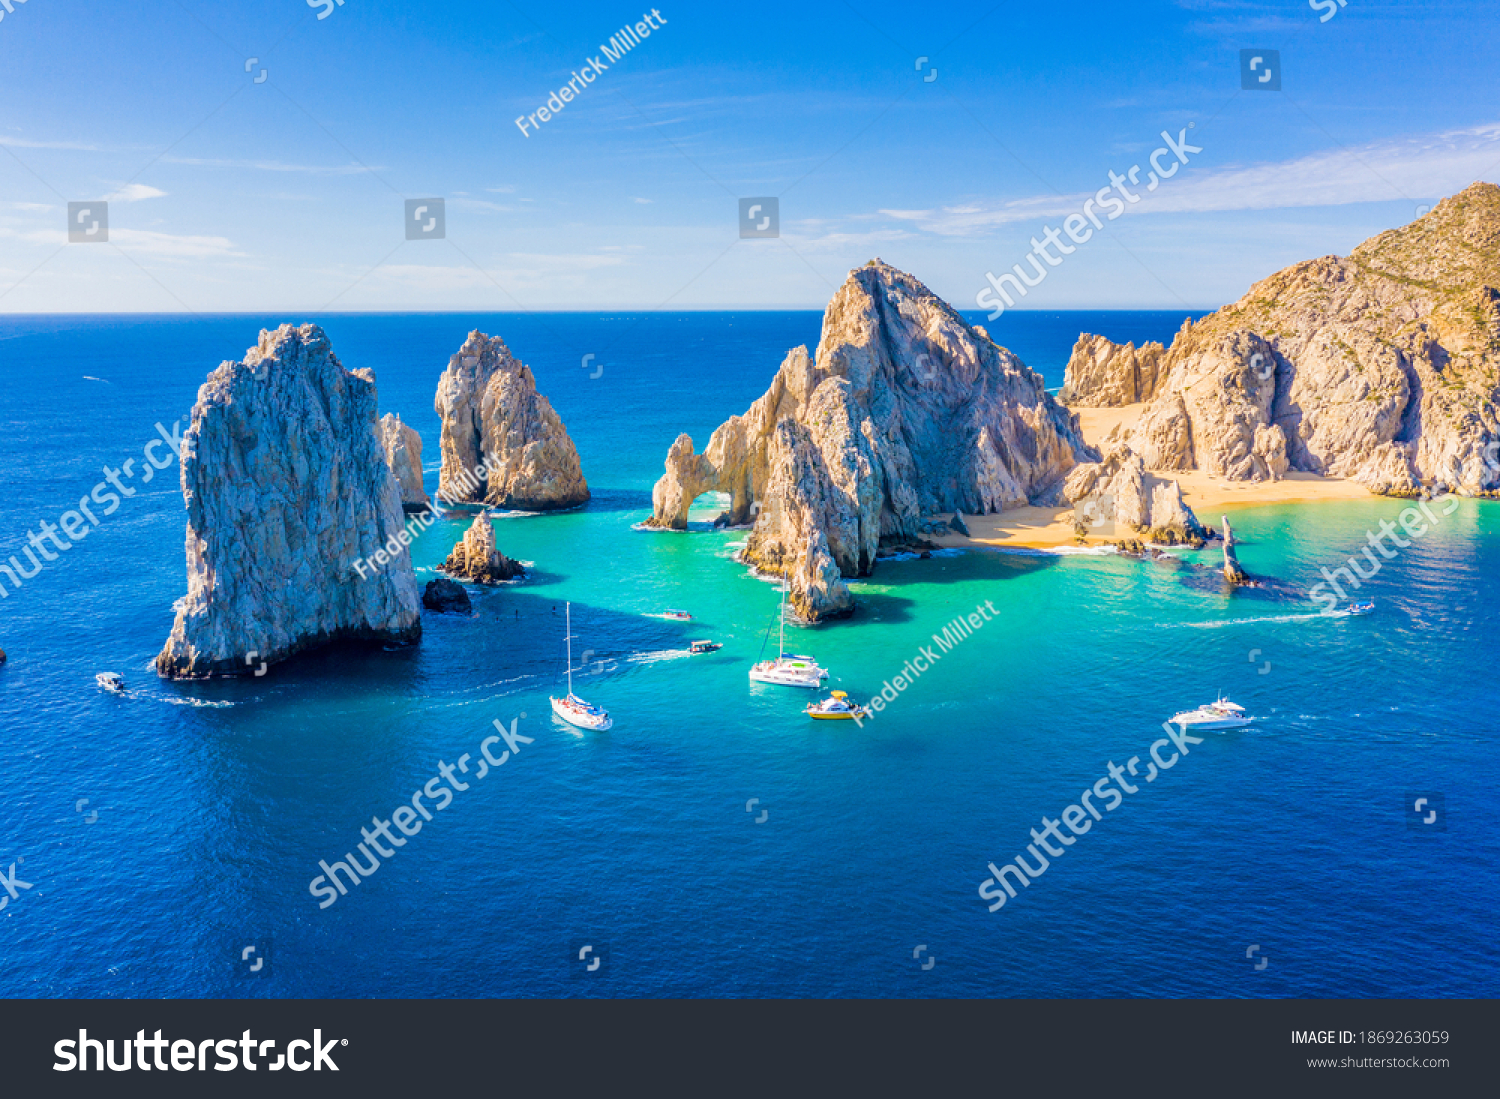 Aerial view of the Arch (El Arco) of Cabo San Lucas, Mexico, at the southernmost tip of the Baja California peninsula #1869263059